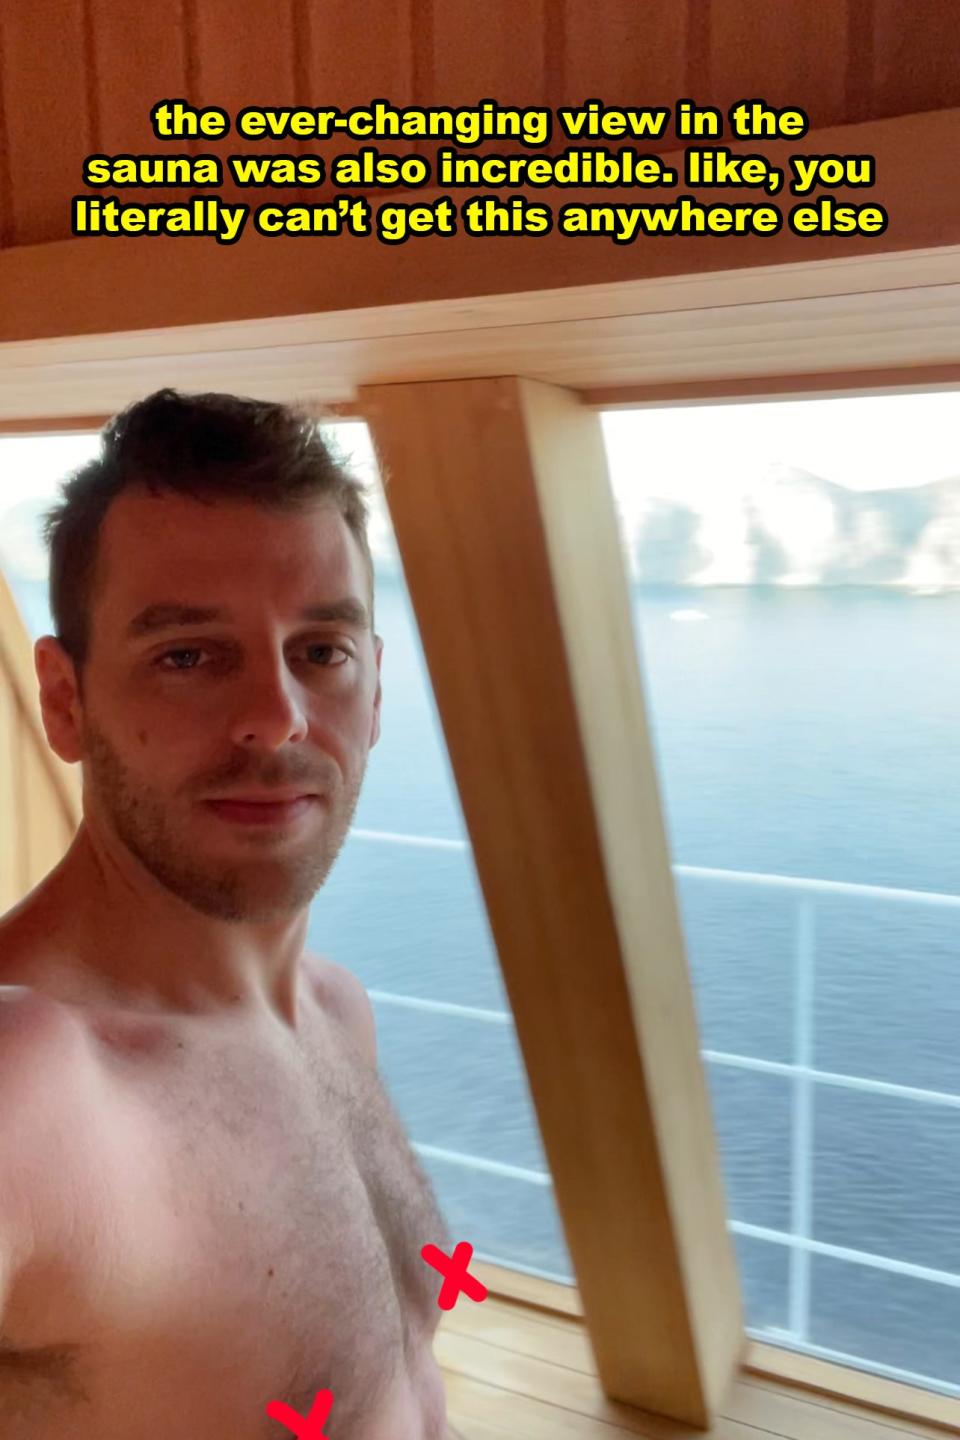 Man smiling in a sauna, with a text overlay expressing appreciation for the view